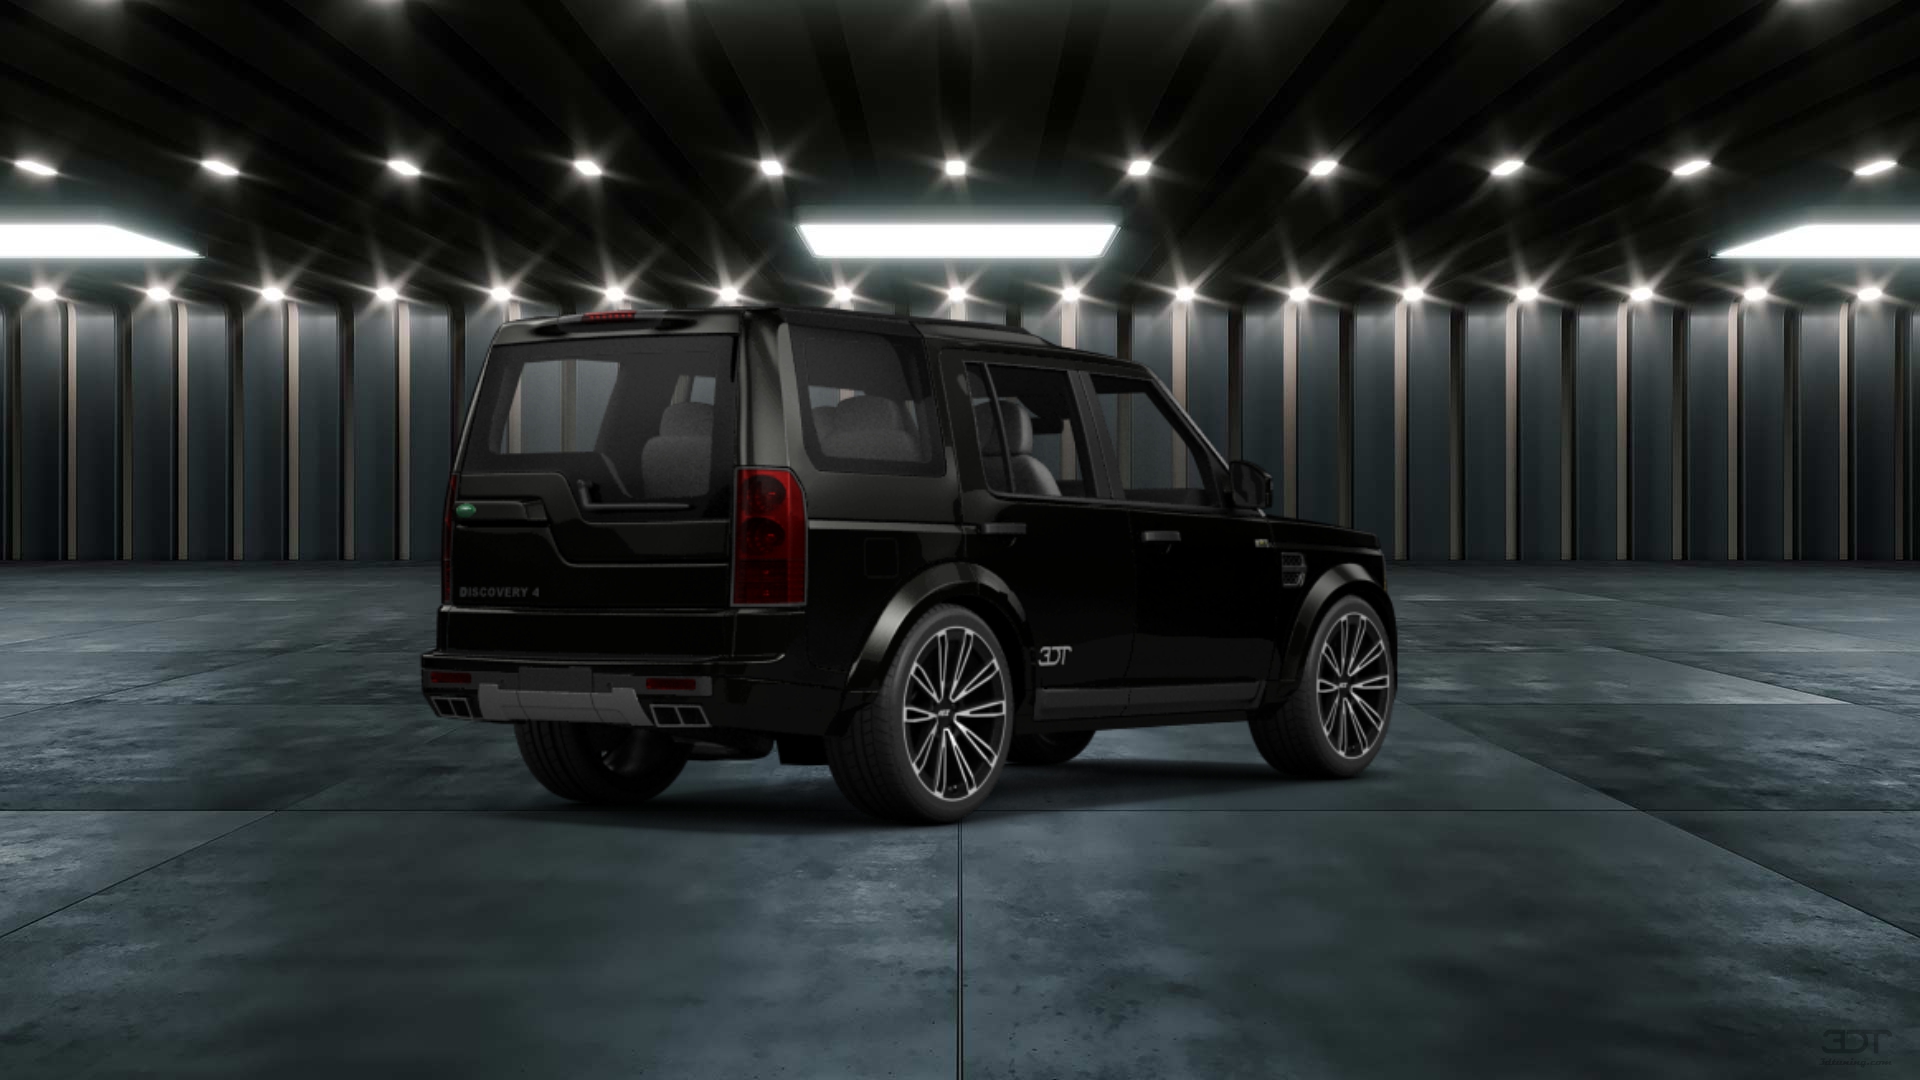 Range Rover Discovery 4 SUV 2012